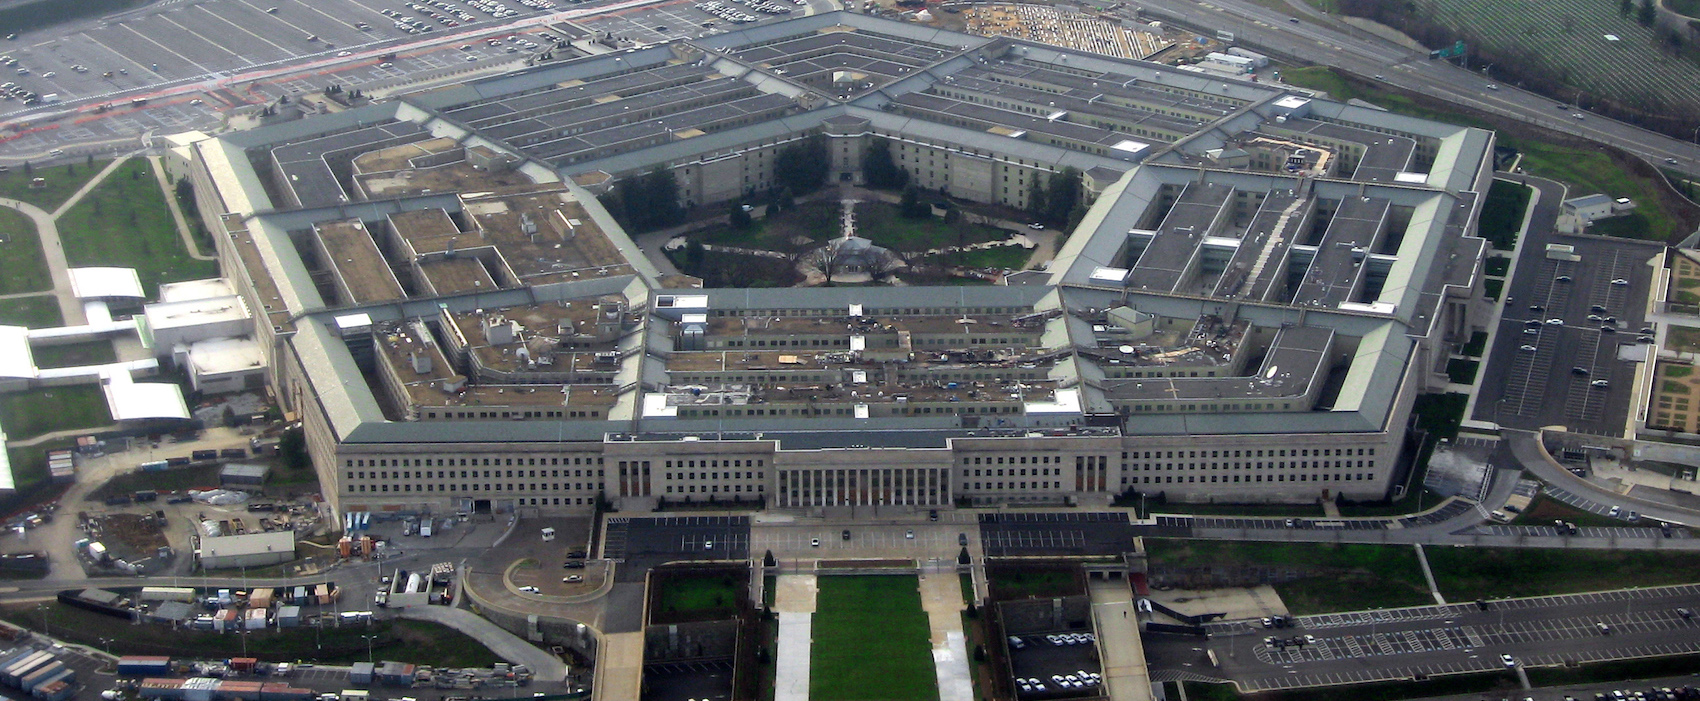 Meet-the-dc-advocacy-org-helping-put-blockchain-on-the-us-military’s-radar